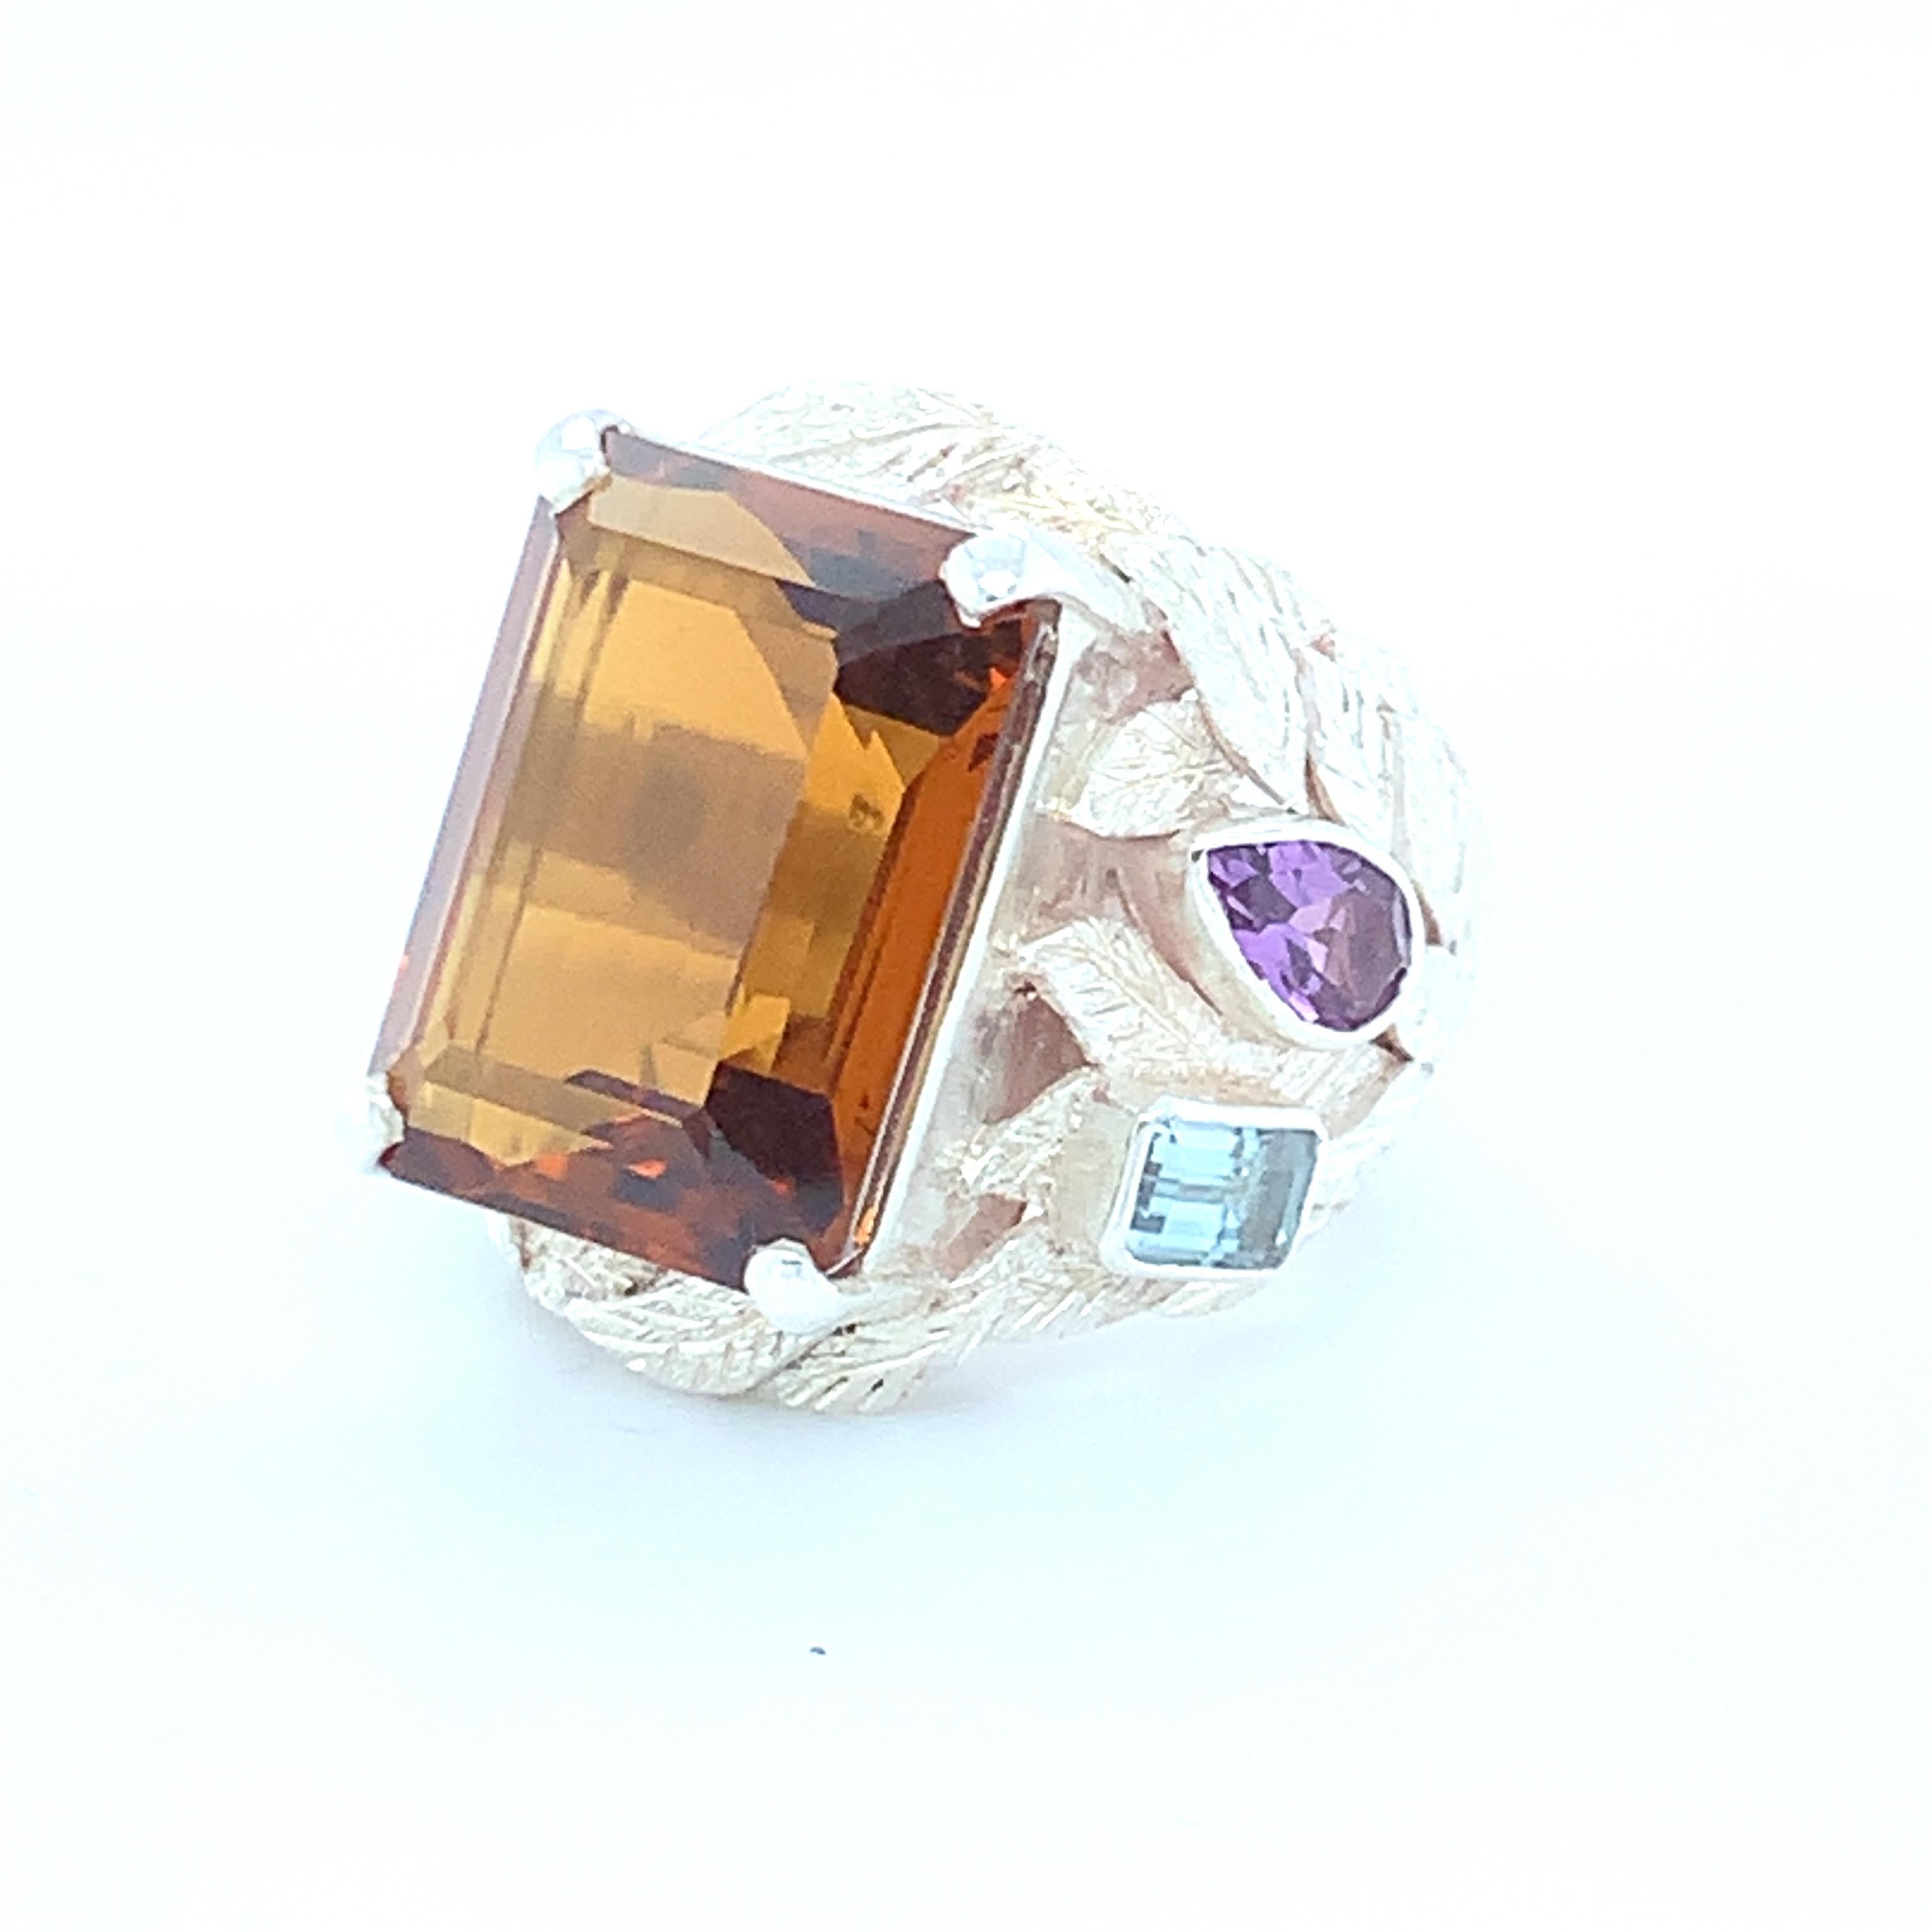 Huge emerald cut Brandy Topaz is the center stone of this stunning, one of a kind cocktail ring. Accents of amethyst and aquamarine are on both sides which enhances the beauty of this ring which is Set in sterling silver and carefully crafted with